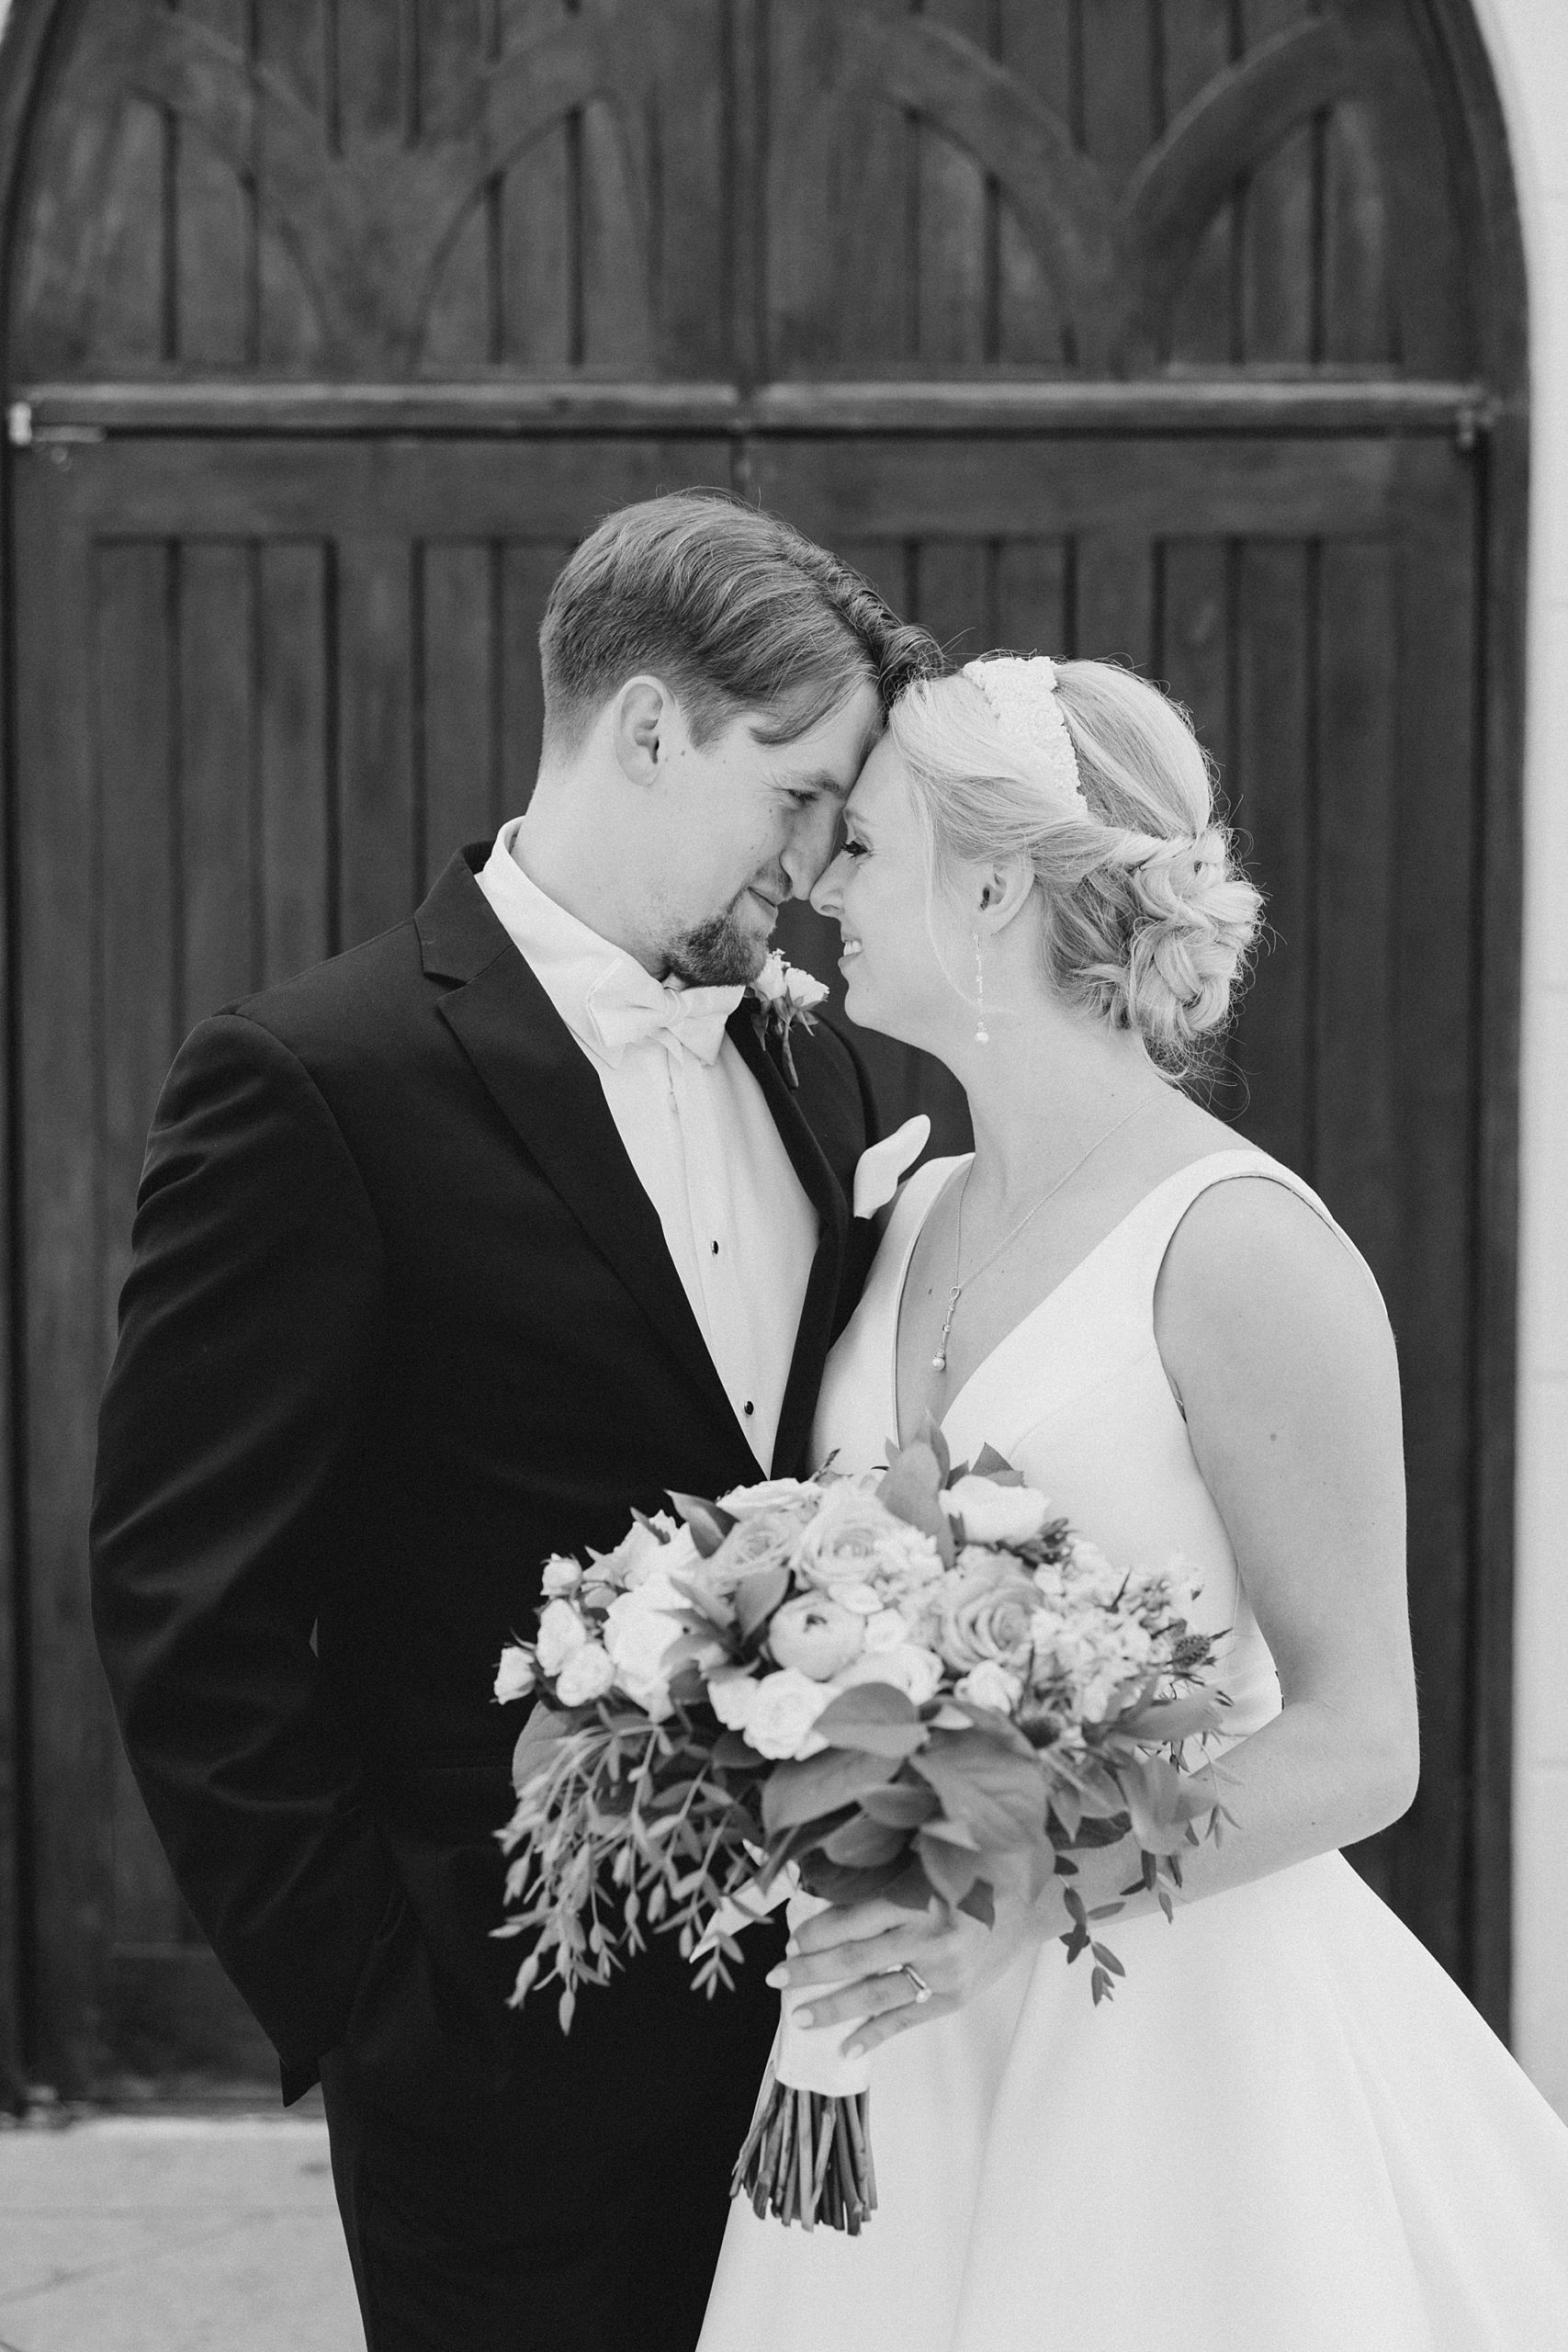 newlyweds lean foreheads together during wedding portraits at Ashton Gardens